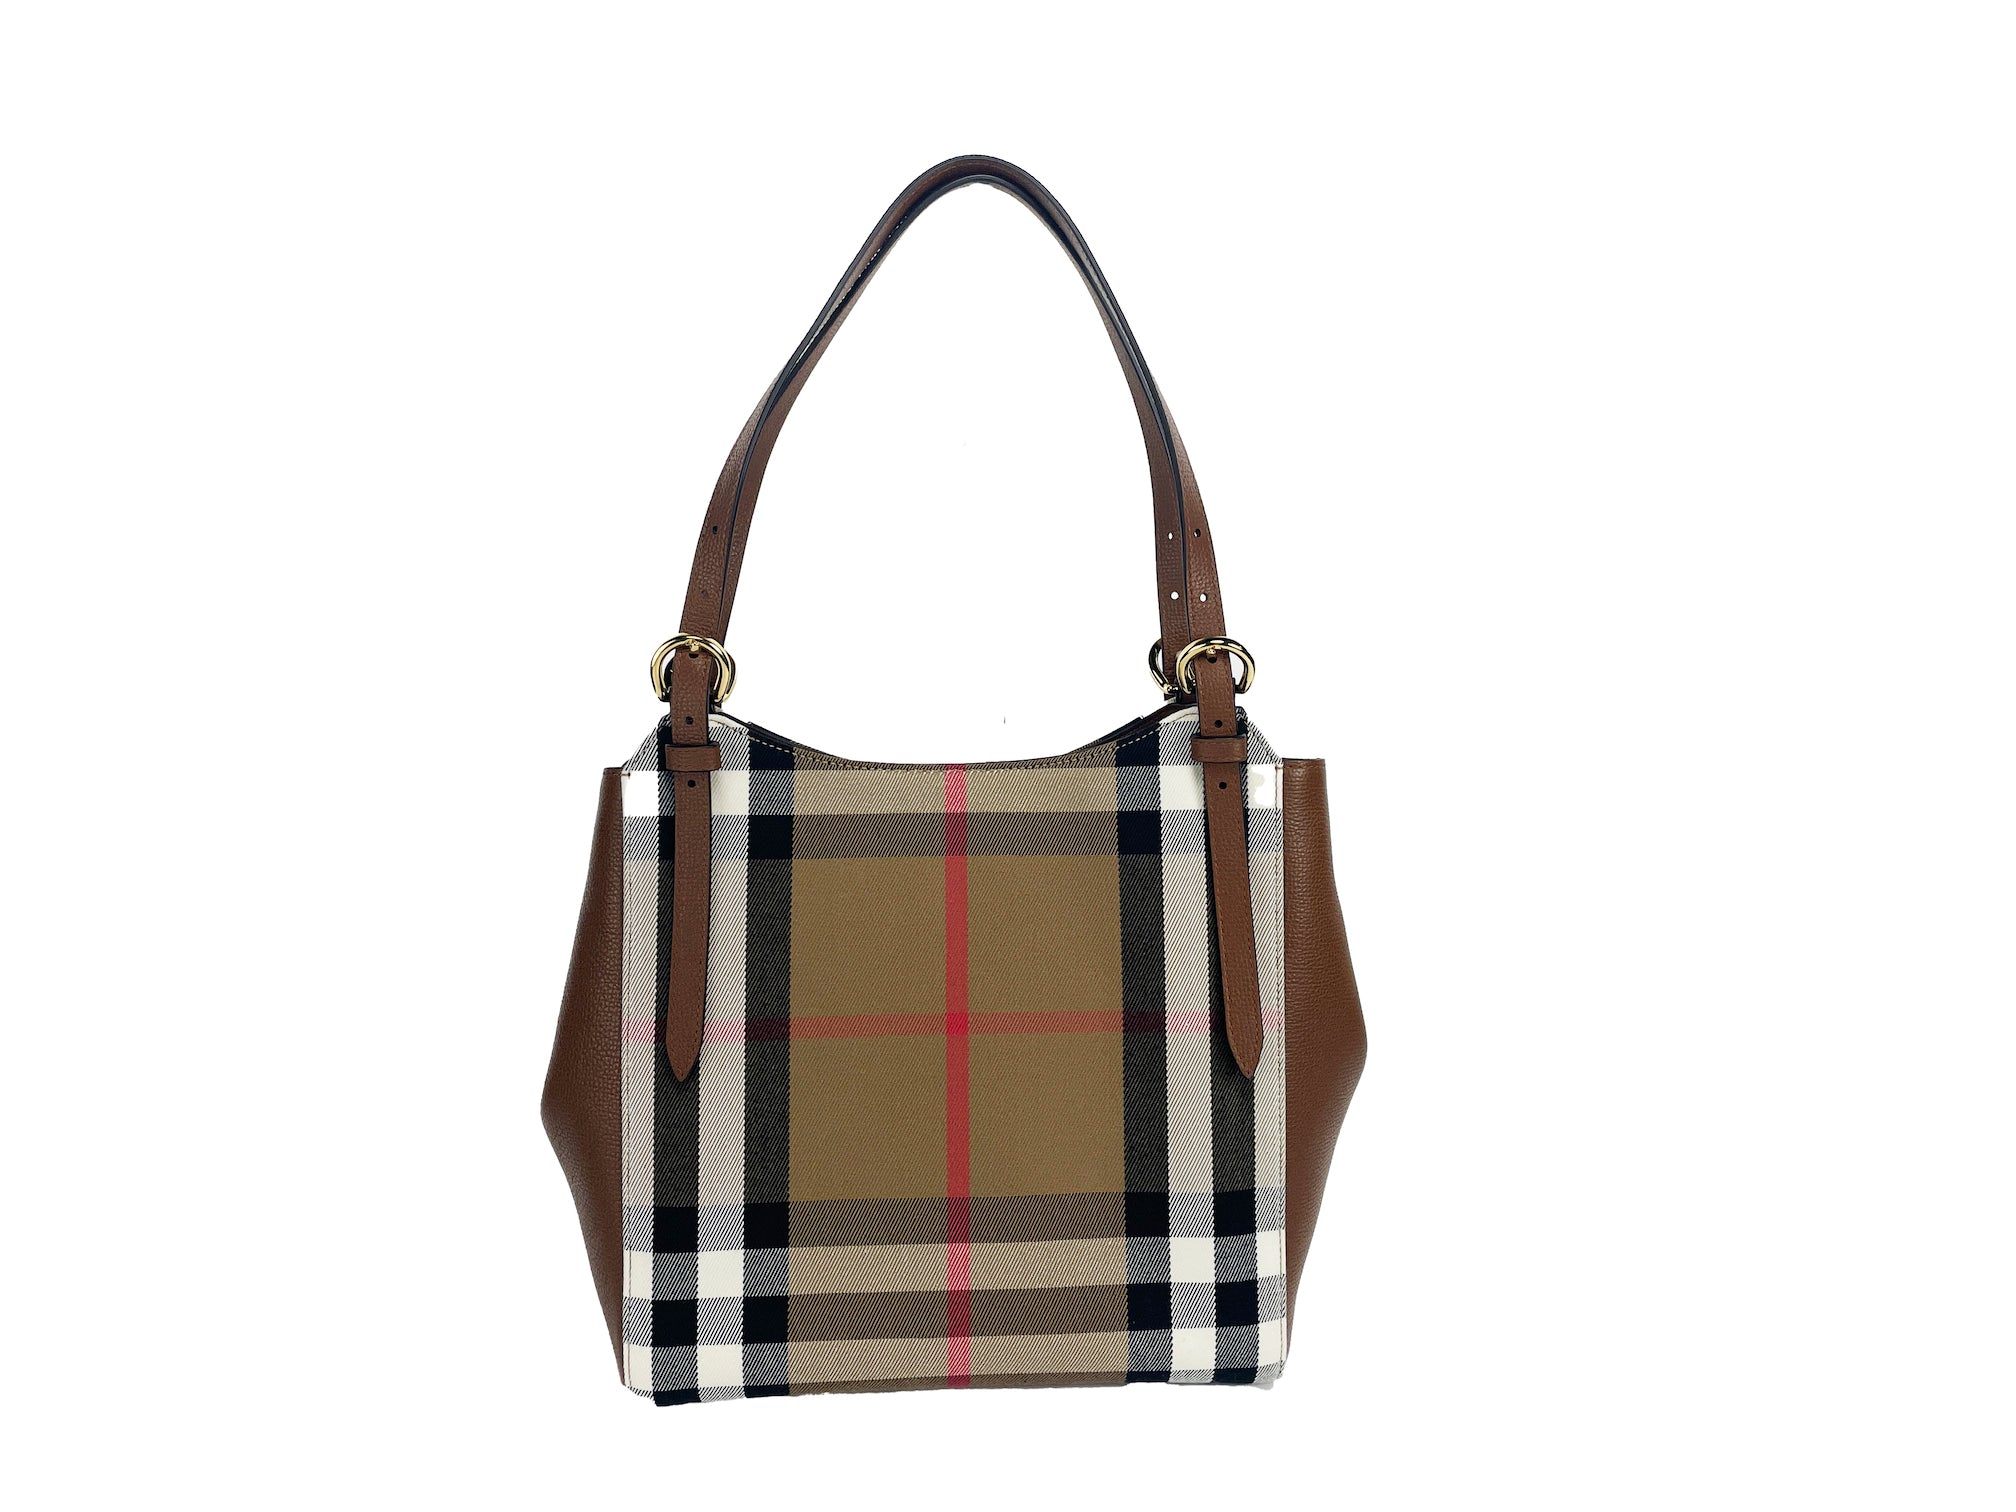 Small Canterby Tan Leather Check Canvas Tote Bag Purse - Divitiae Glamour